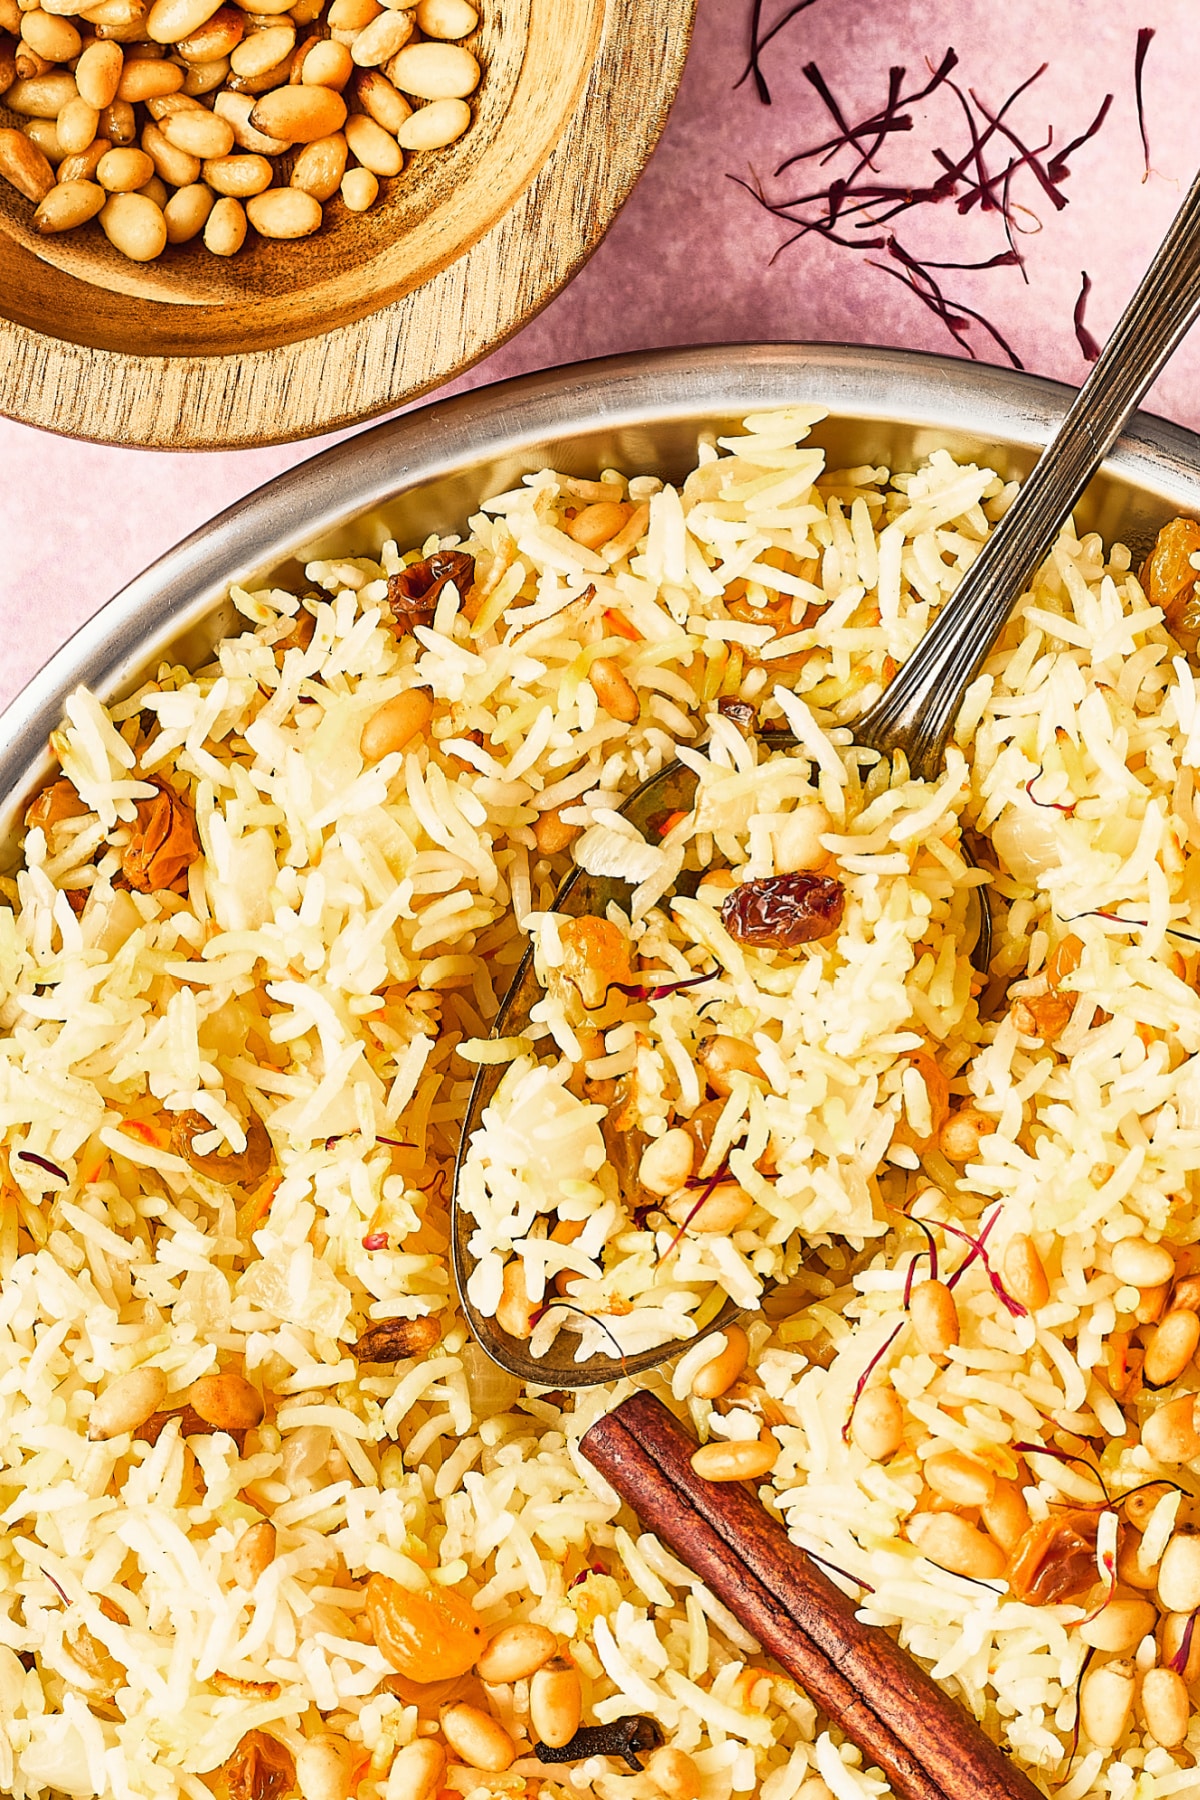 Overhead view of a silver serving bowl of yellow saffron rice garnished with golden raisins, pine nuts, a cinnamon stick and saffron strands. A small wooden bowl of toasted pine nuts sits to the side of the rice, and a serving spoon is in the bowl of rice.